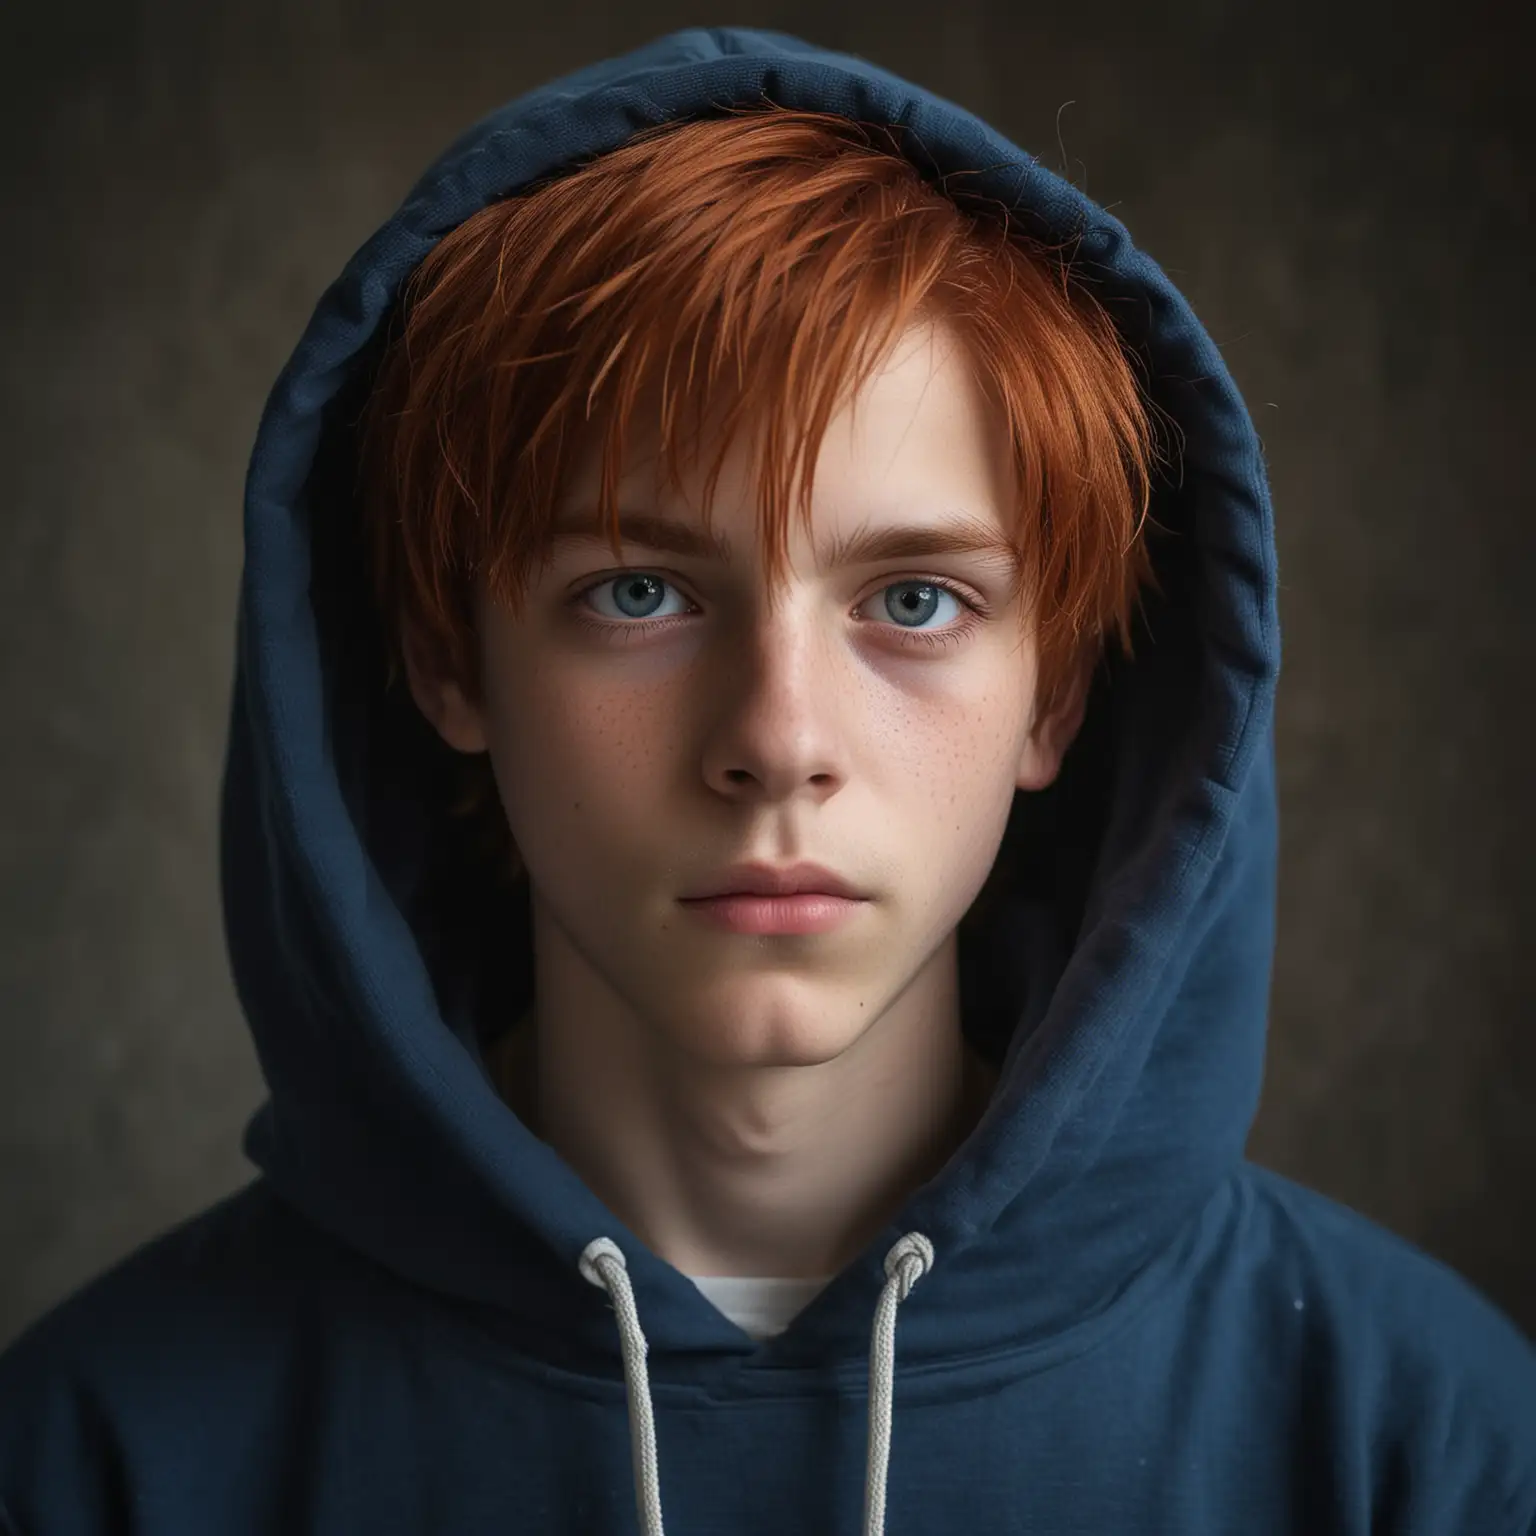 Portrait of a romantic Renaissance style red hair uninnocent boy 15 years old looking straight into camera with a patrol blue hoodie. 
Eyes are Blue and uninnocent, dreamy. Hoodie color is dark blue
Round face
Romantic face
